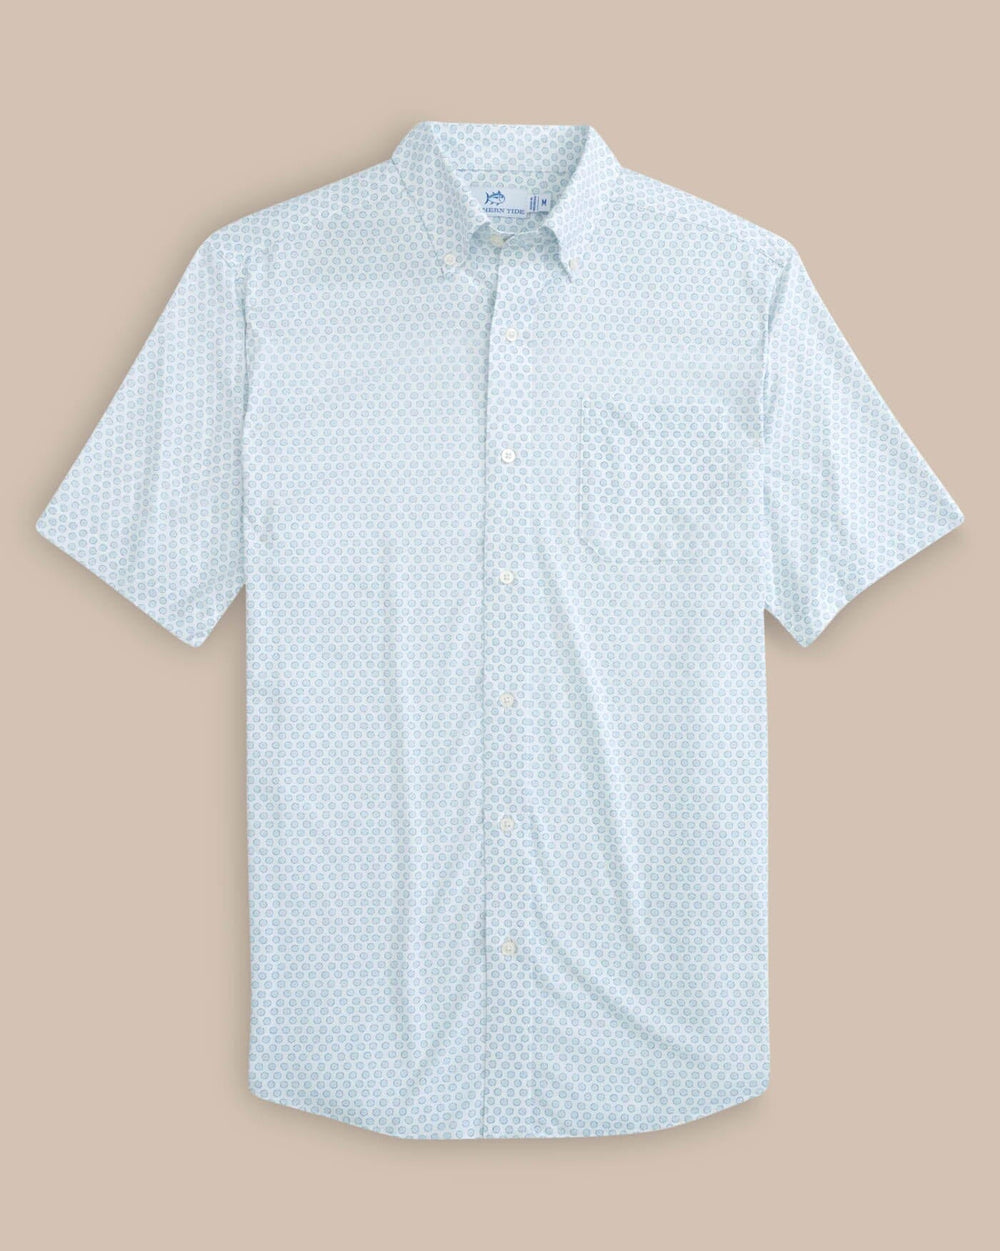 The front view of the Southern Tide brrr Intercoastal Floral To See Short Sleeve Sportshirt by Southern Tide - Wake Blue